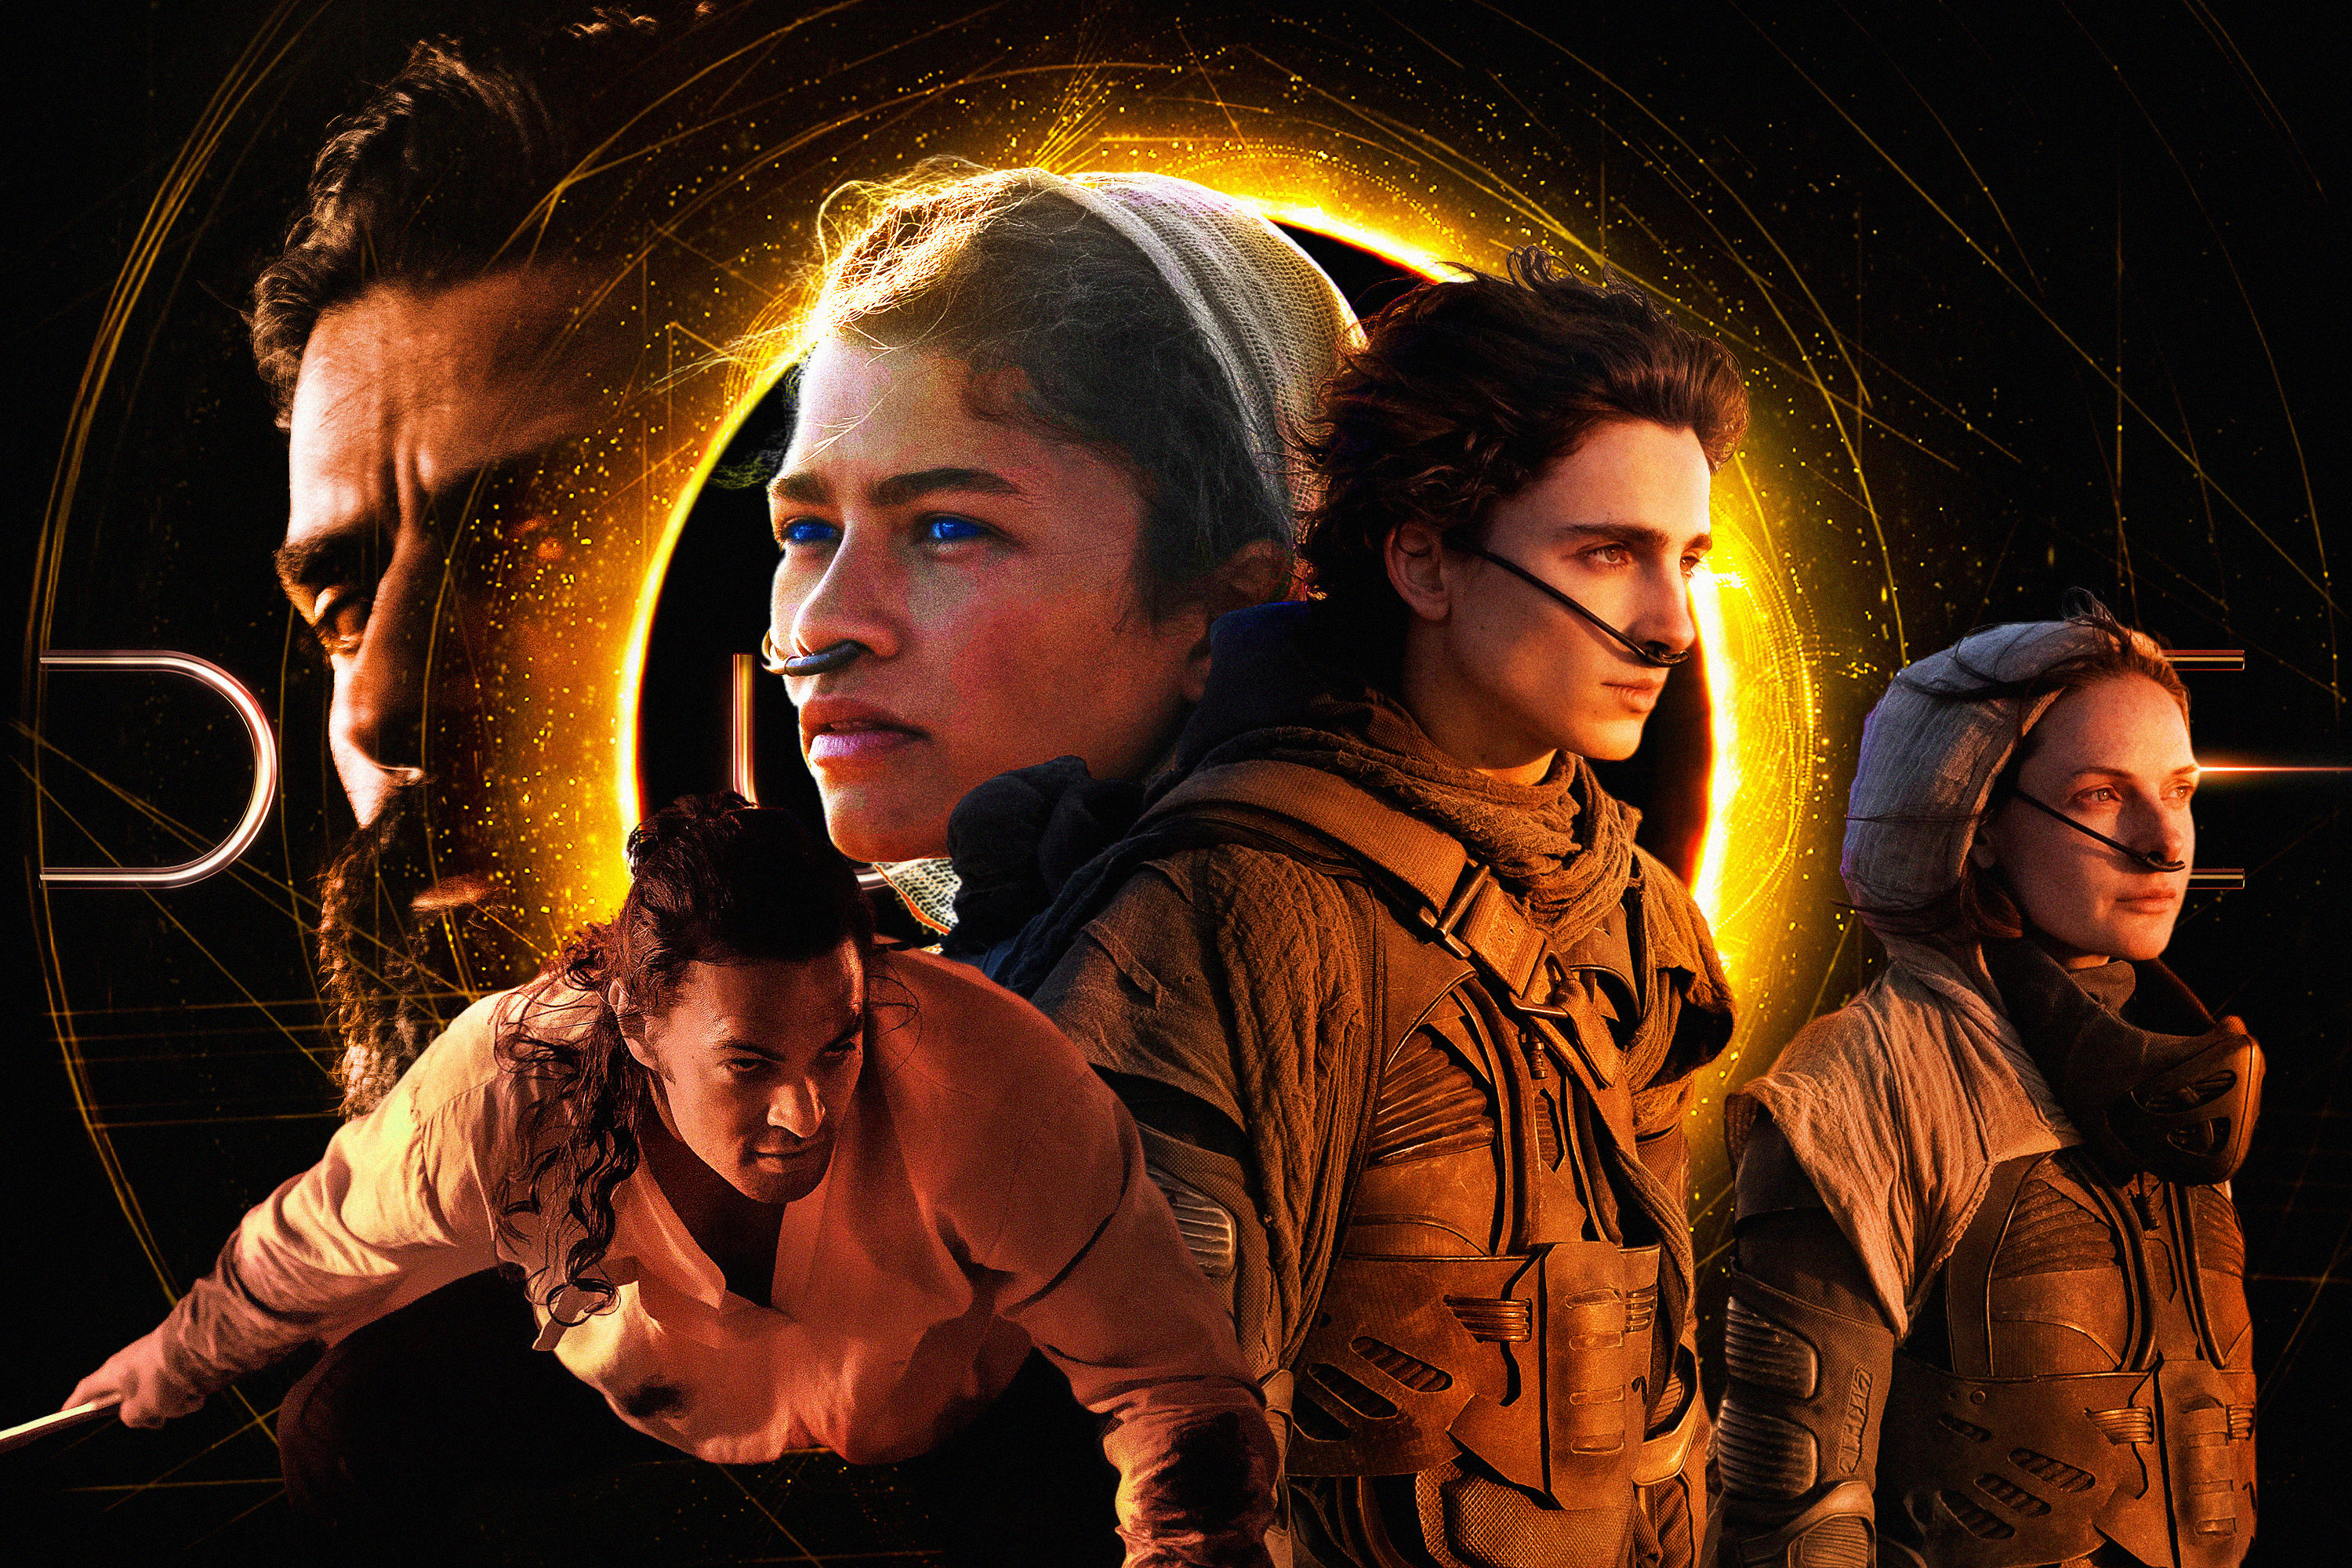 Photo illustration featuring a montage of the main characters from the Movie DUNE on a dark background and a glowing planet